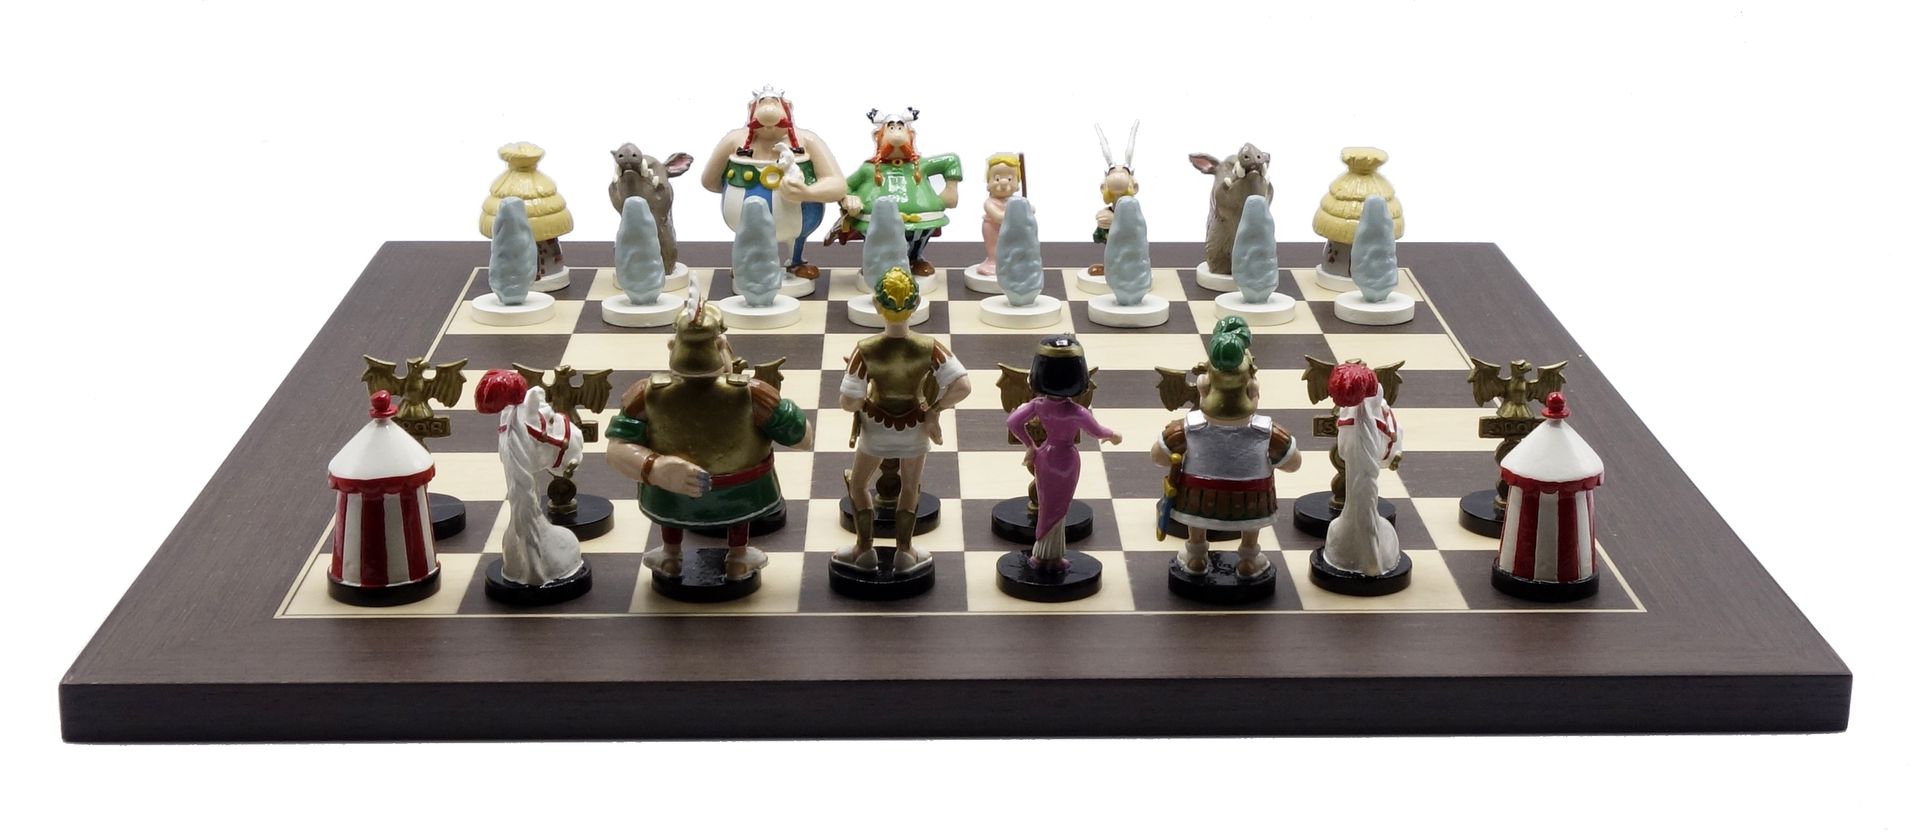 Uderzo PIXI : Asterix and Obelix, the chess game (40509), 32 pieces, 1991, n°/25&hellip;